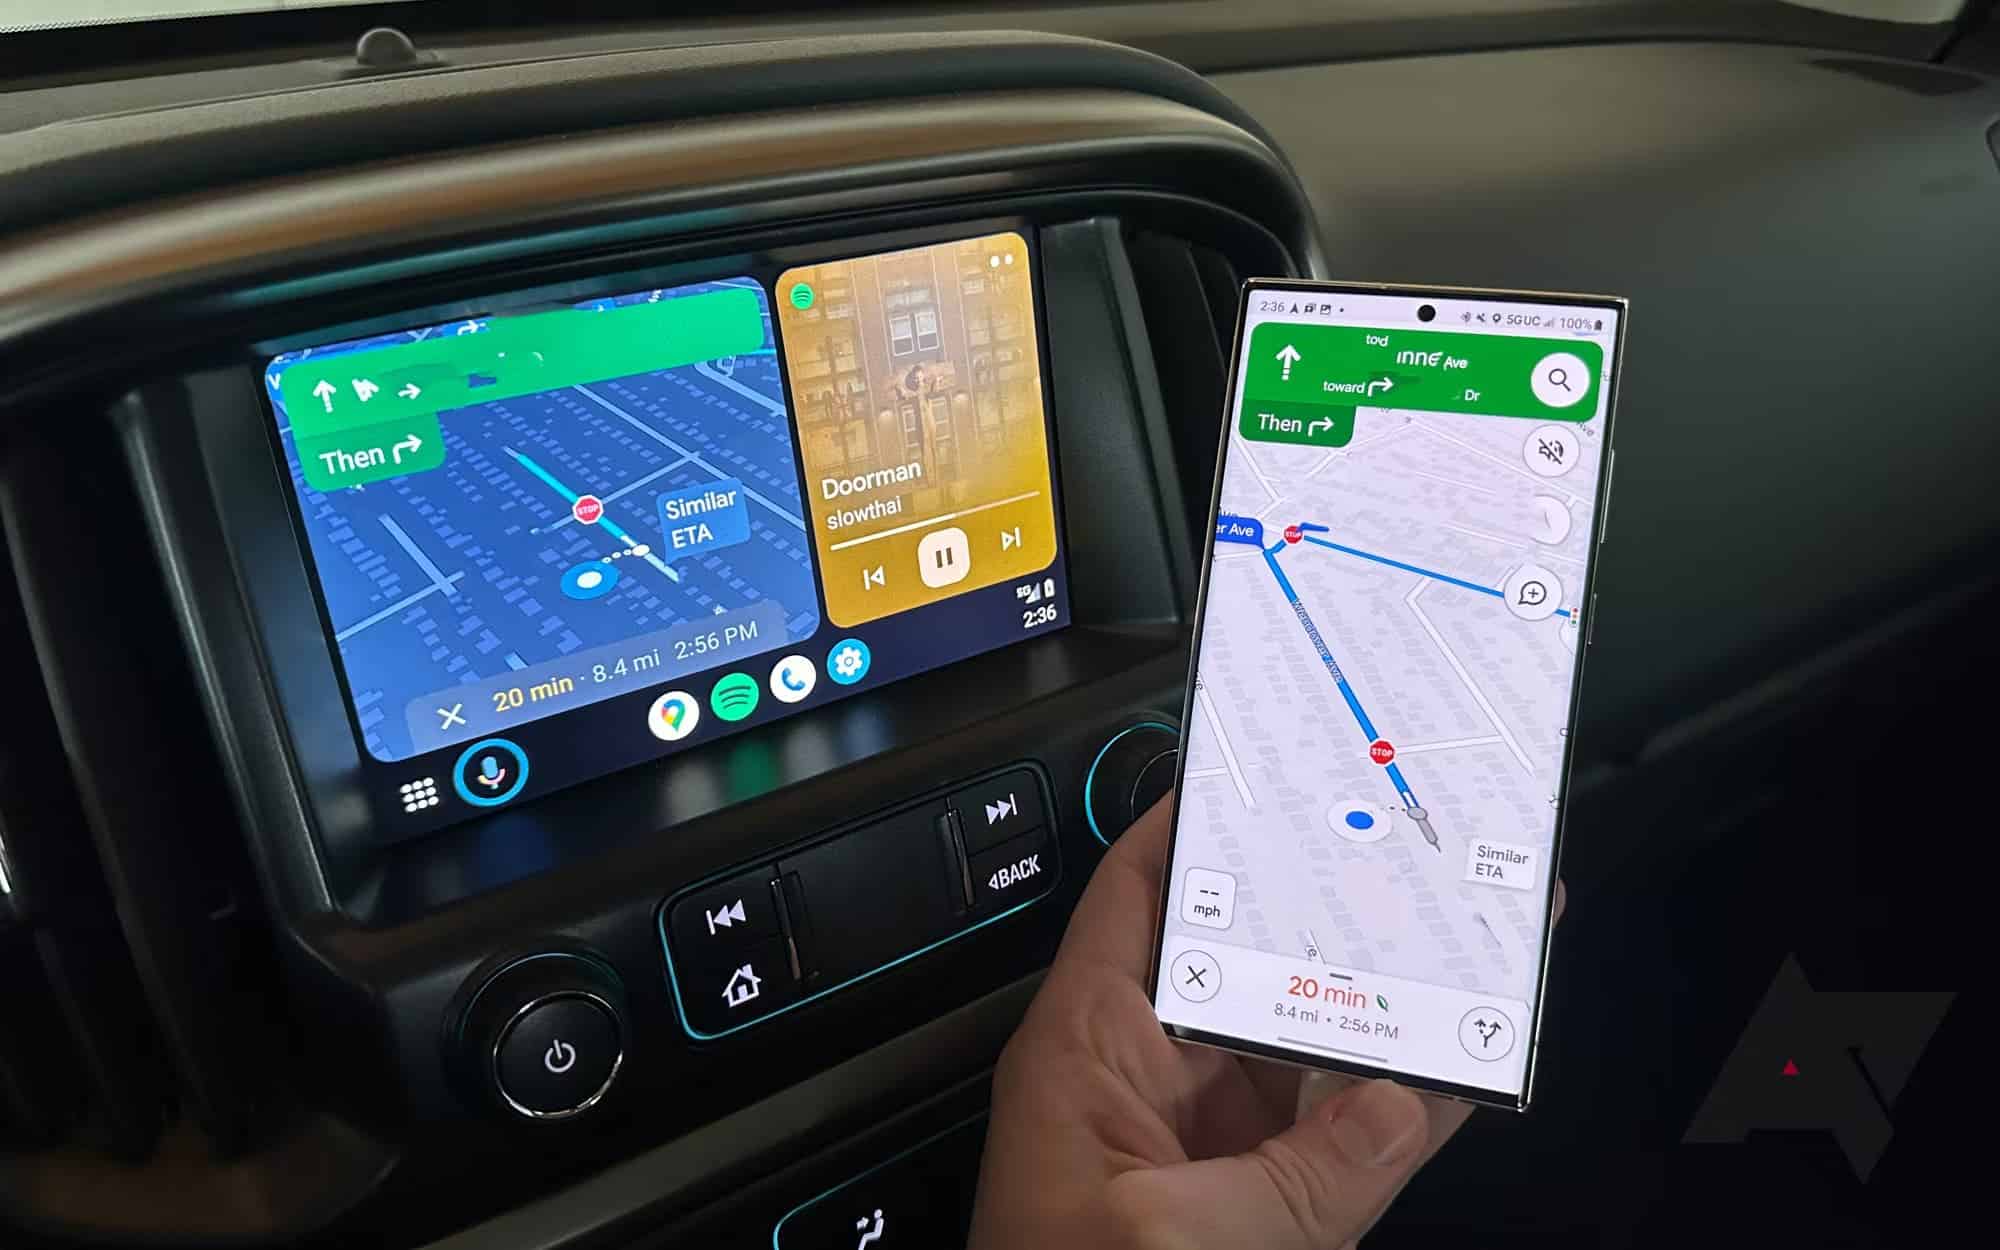 Google’s Latest Android Auto Update Transforms How We Handle Texts While Driving